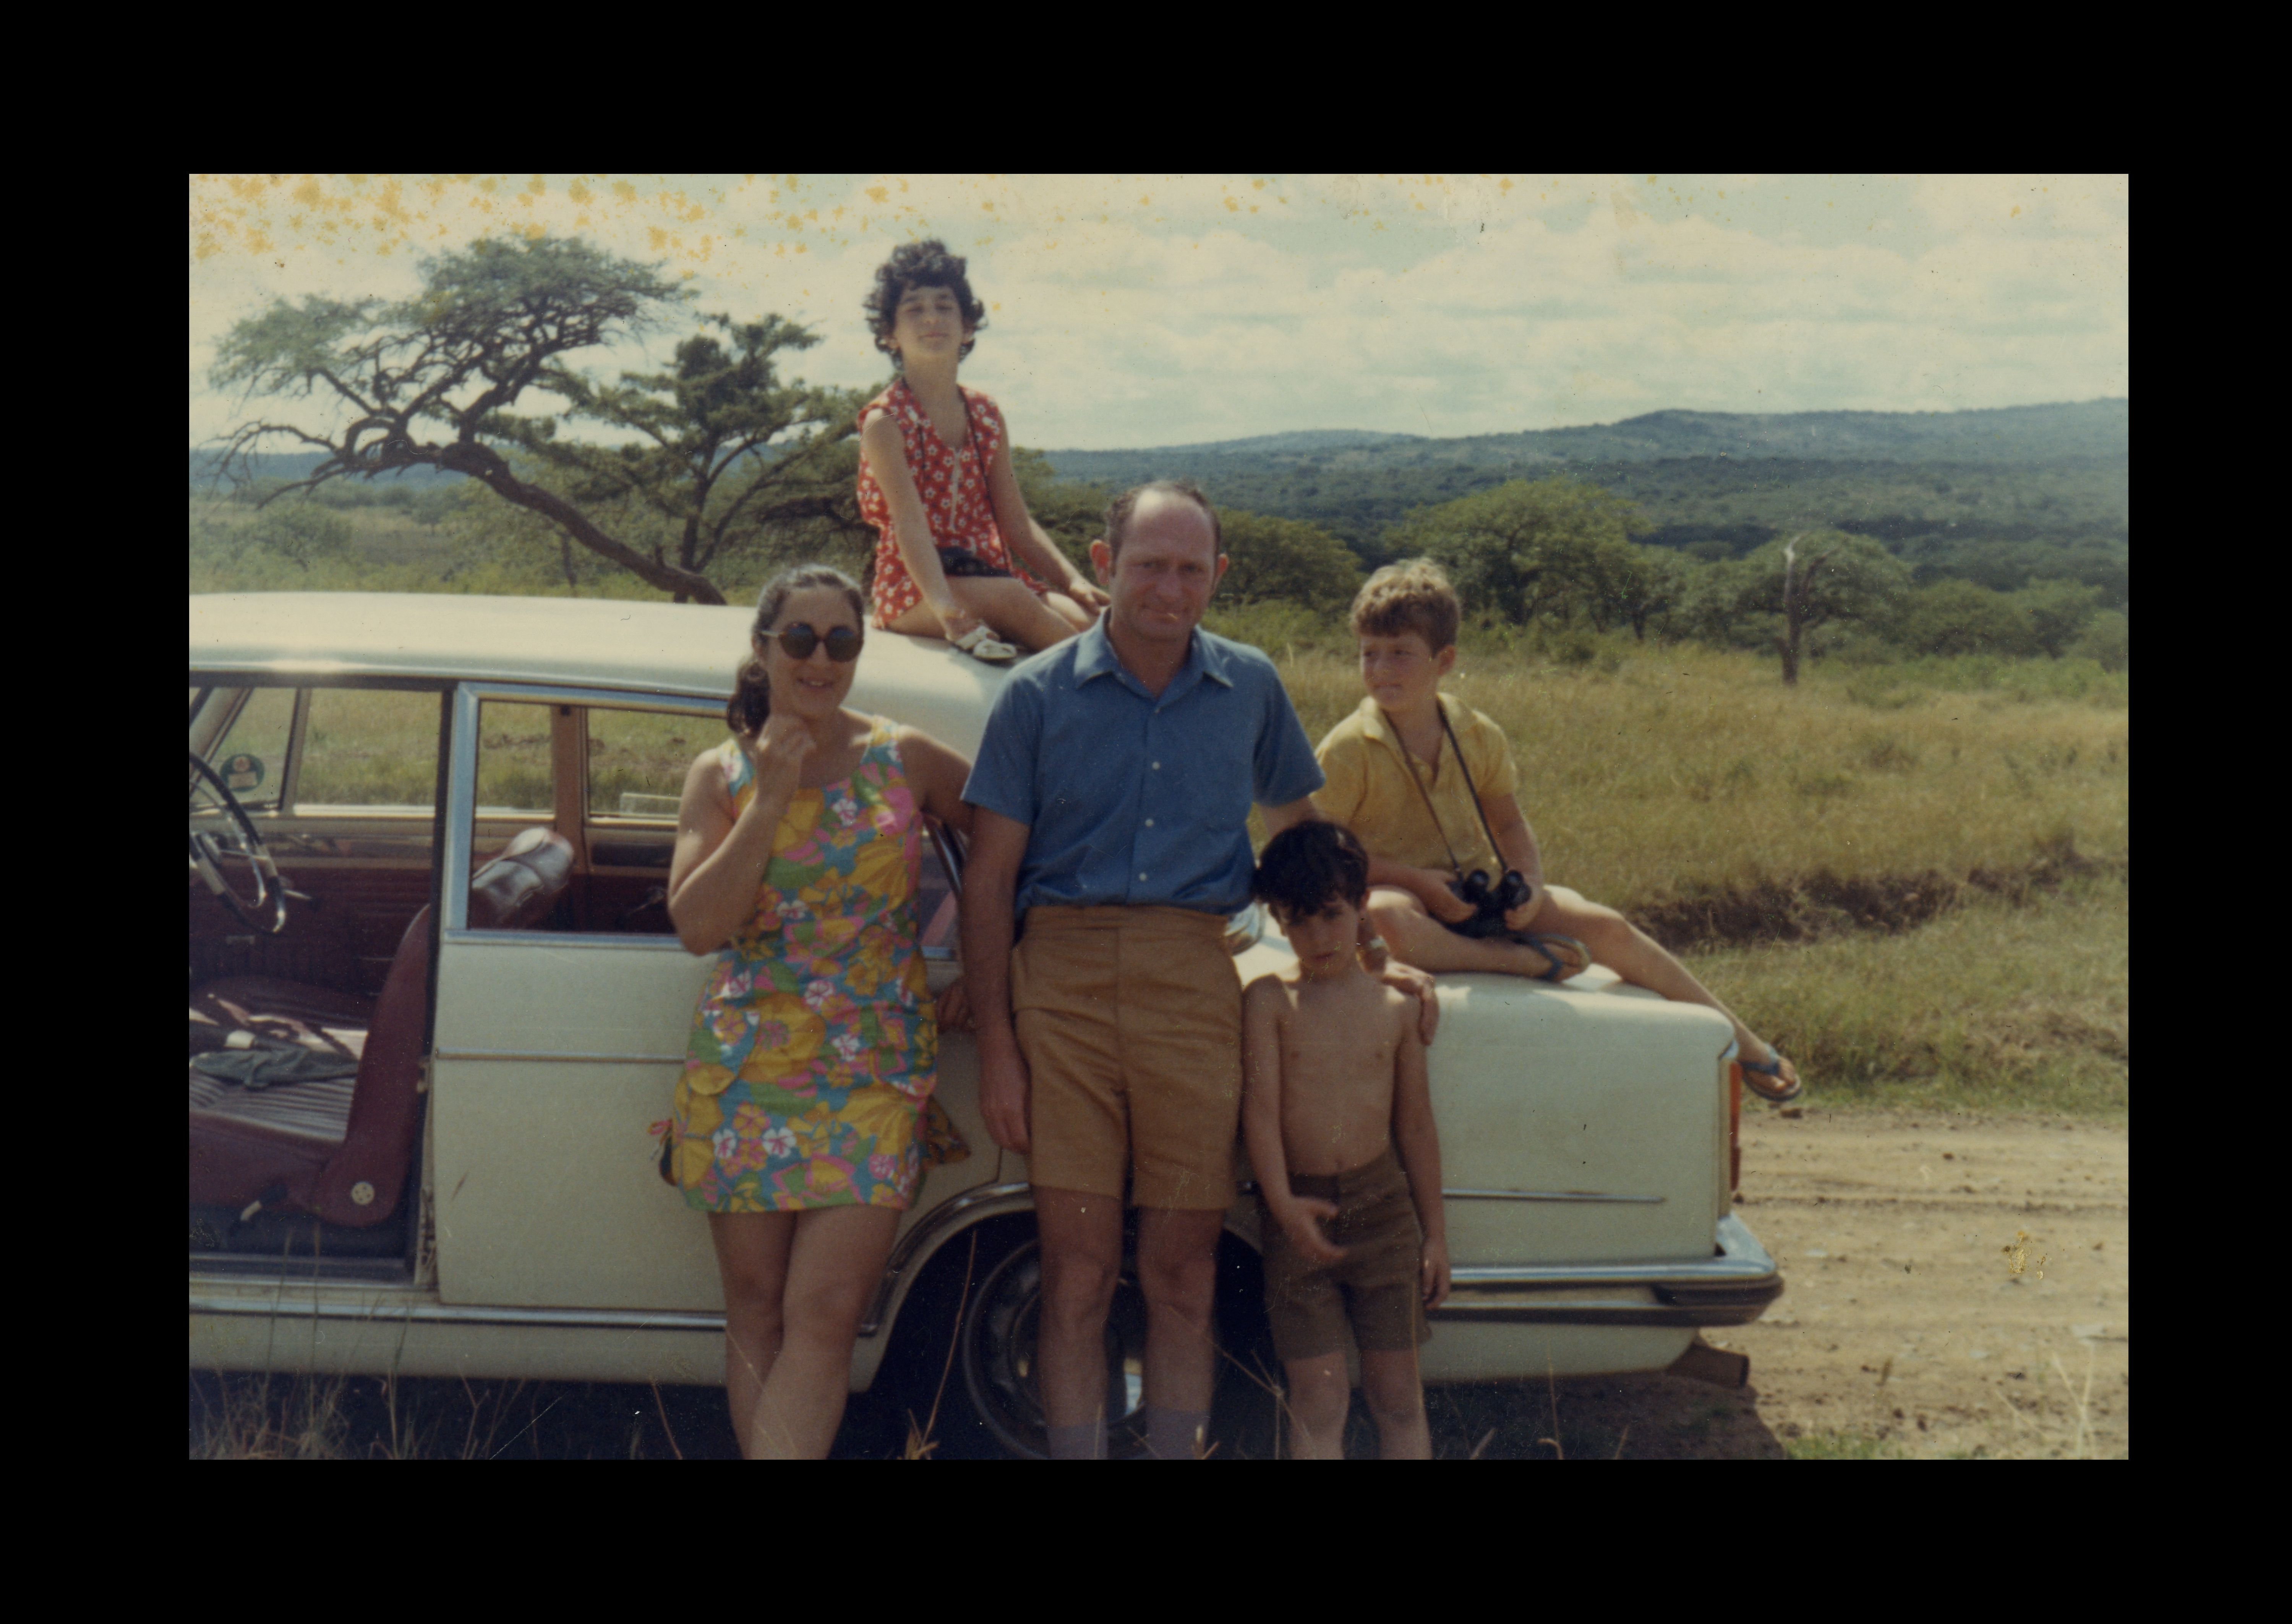 The Skuy family in South Africa